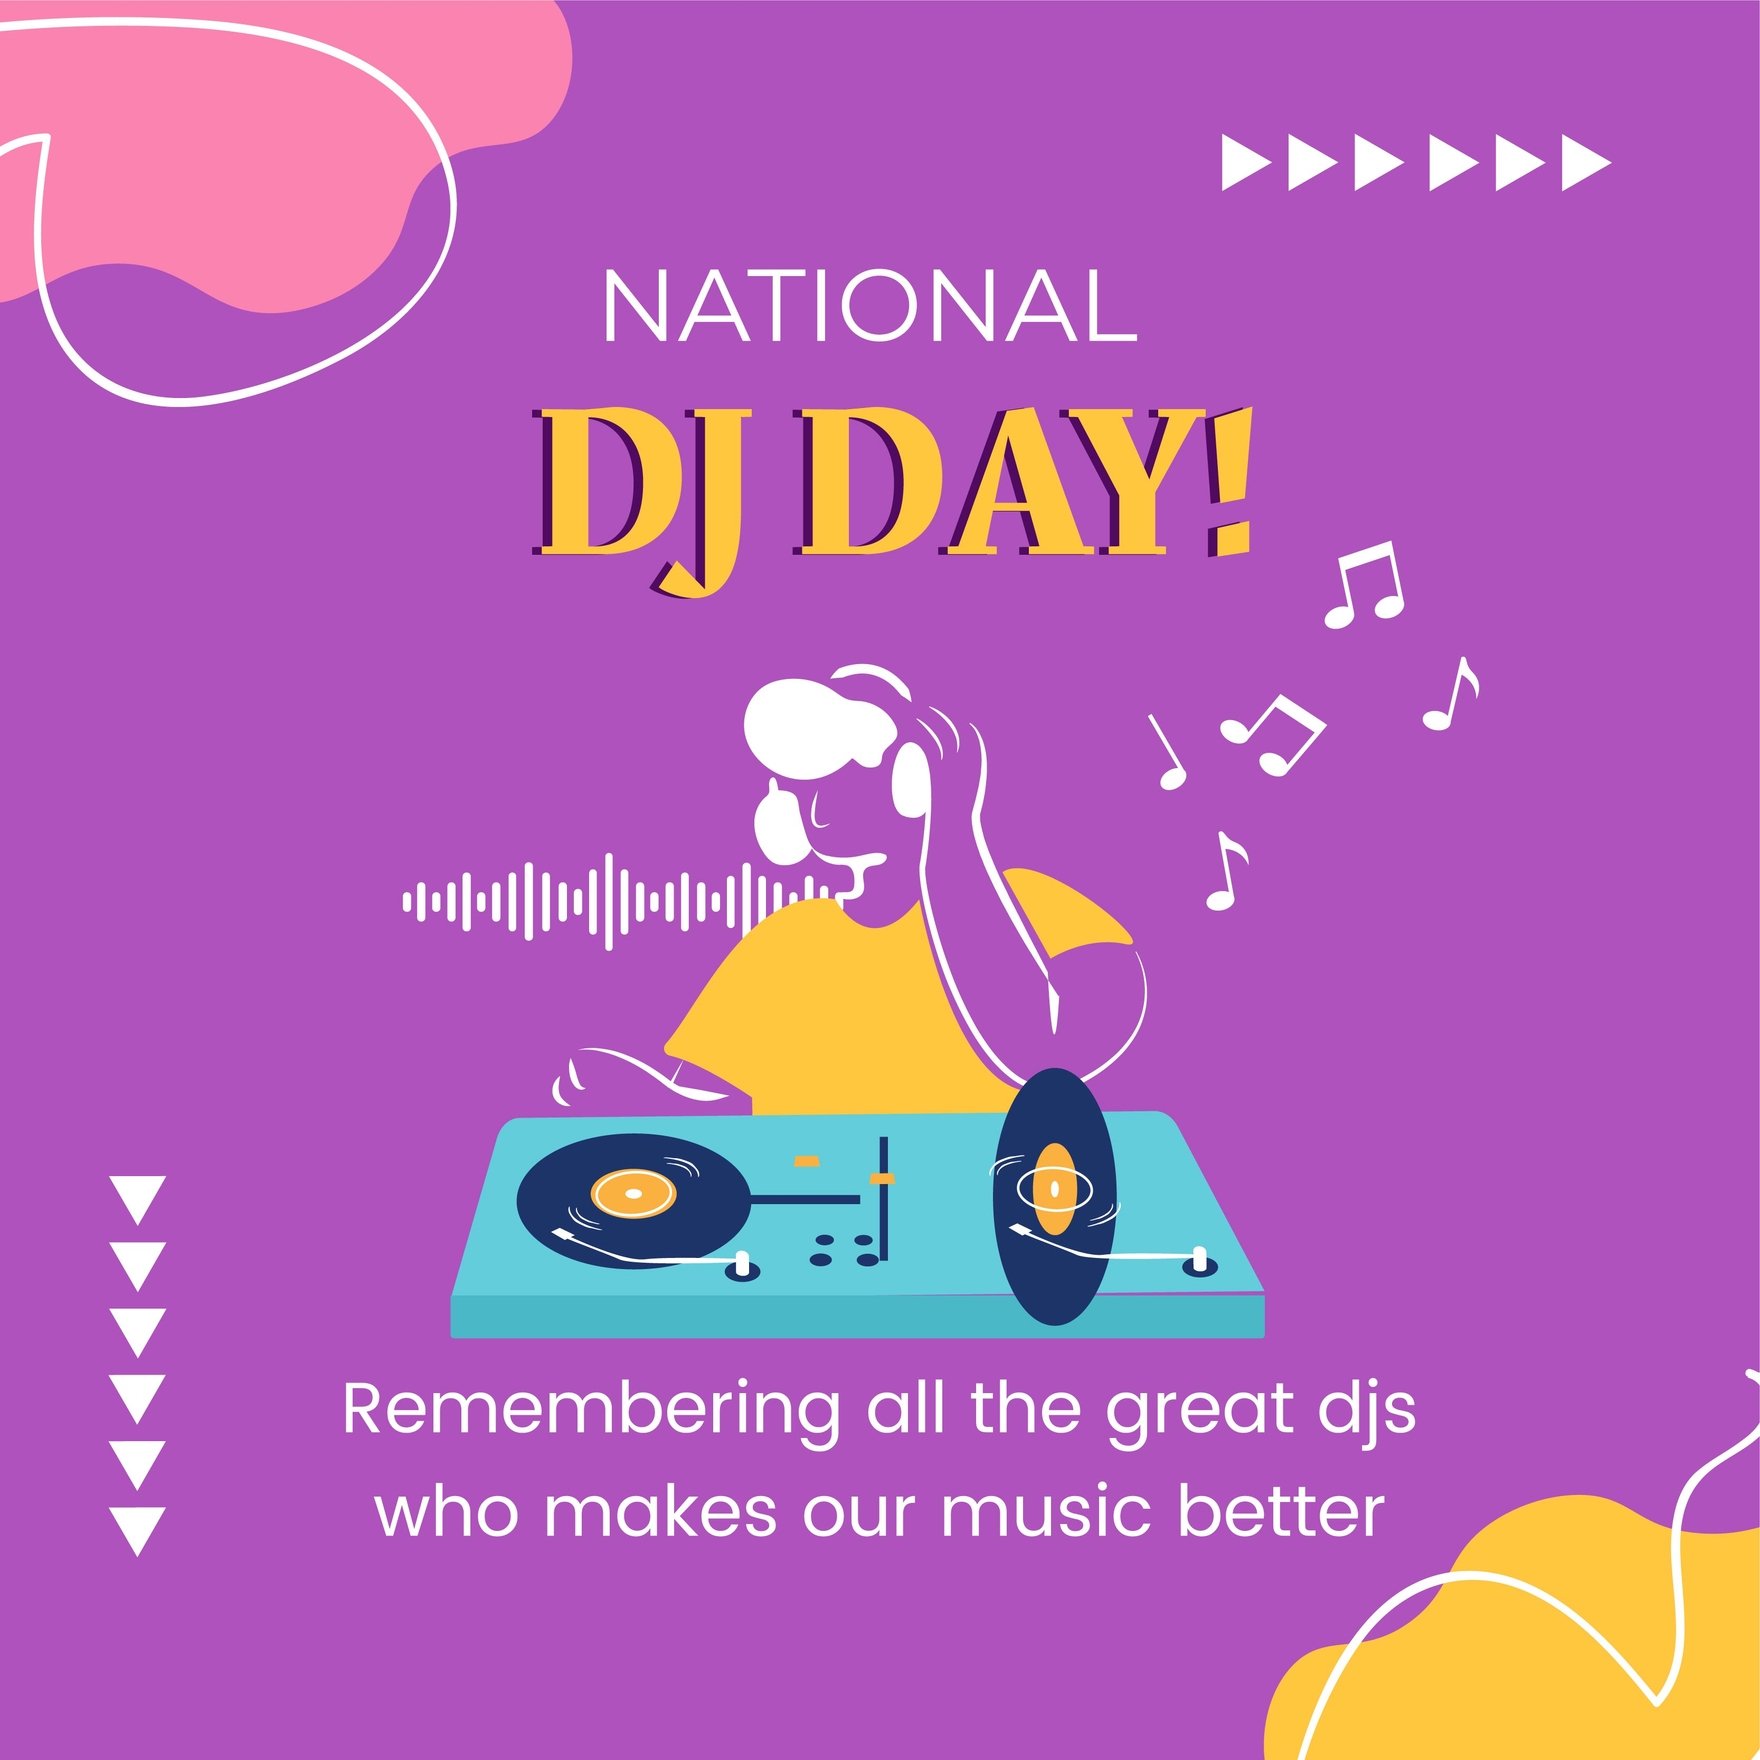 Free National DJ Day Whatsapp Post in Illustrator, PSD, EPS, SVG, PNG, JPEG